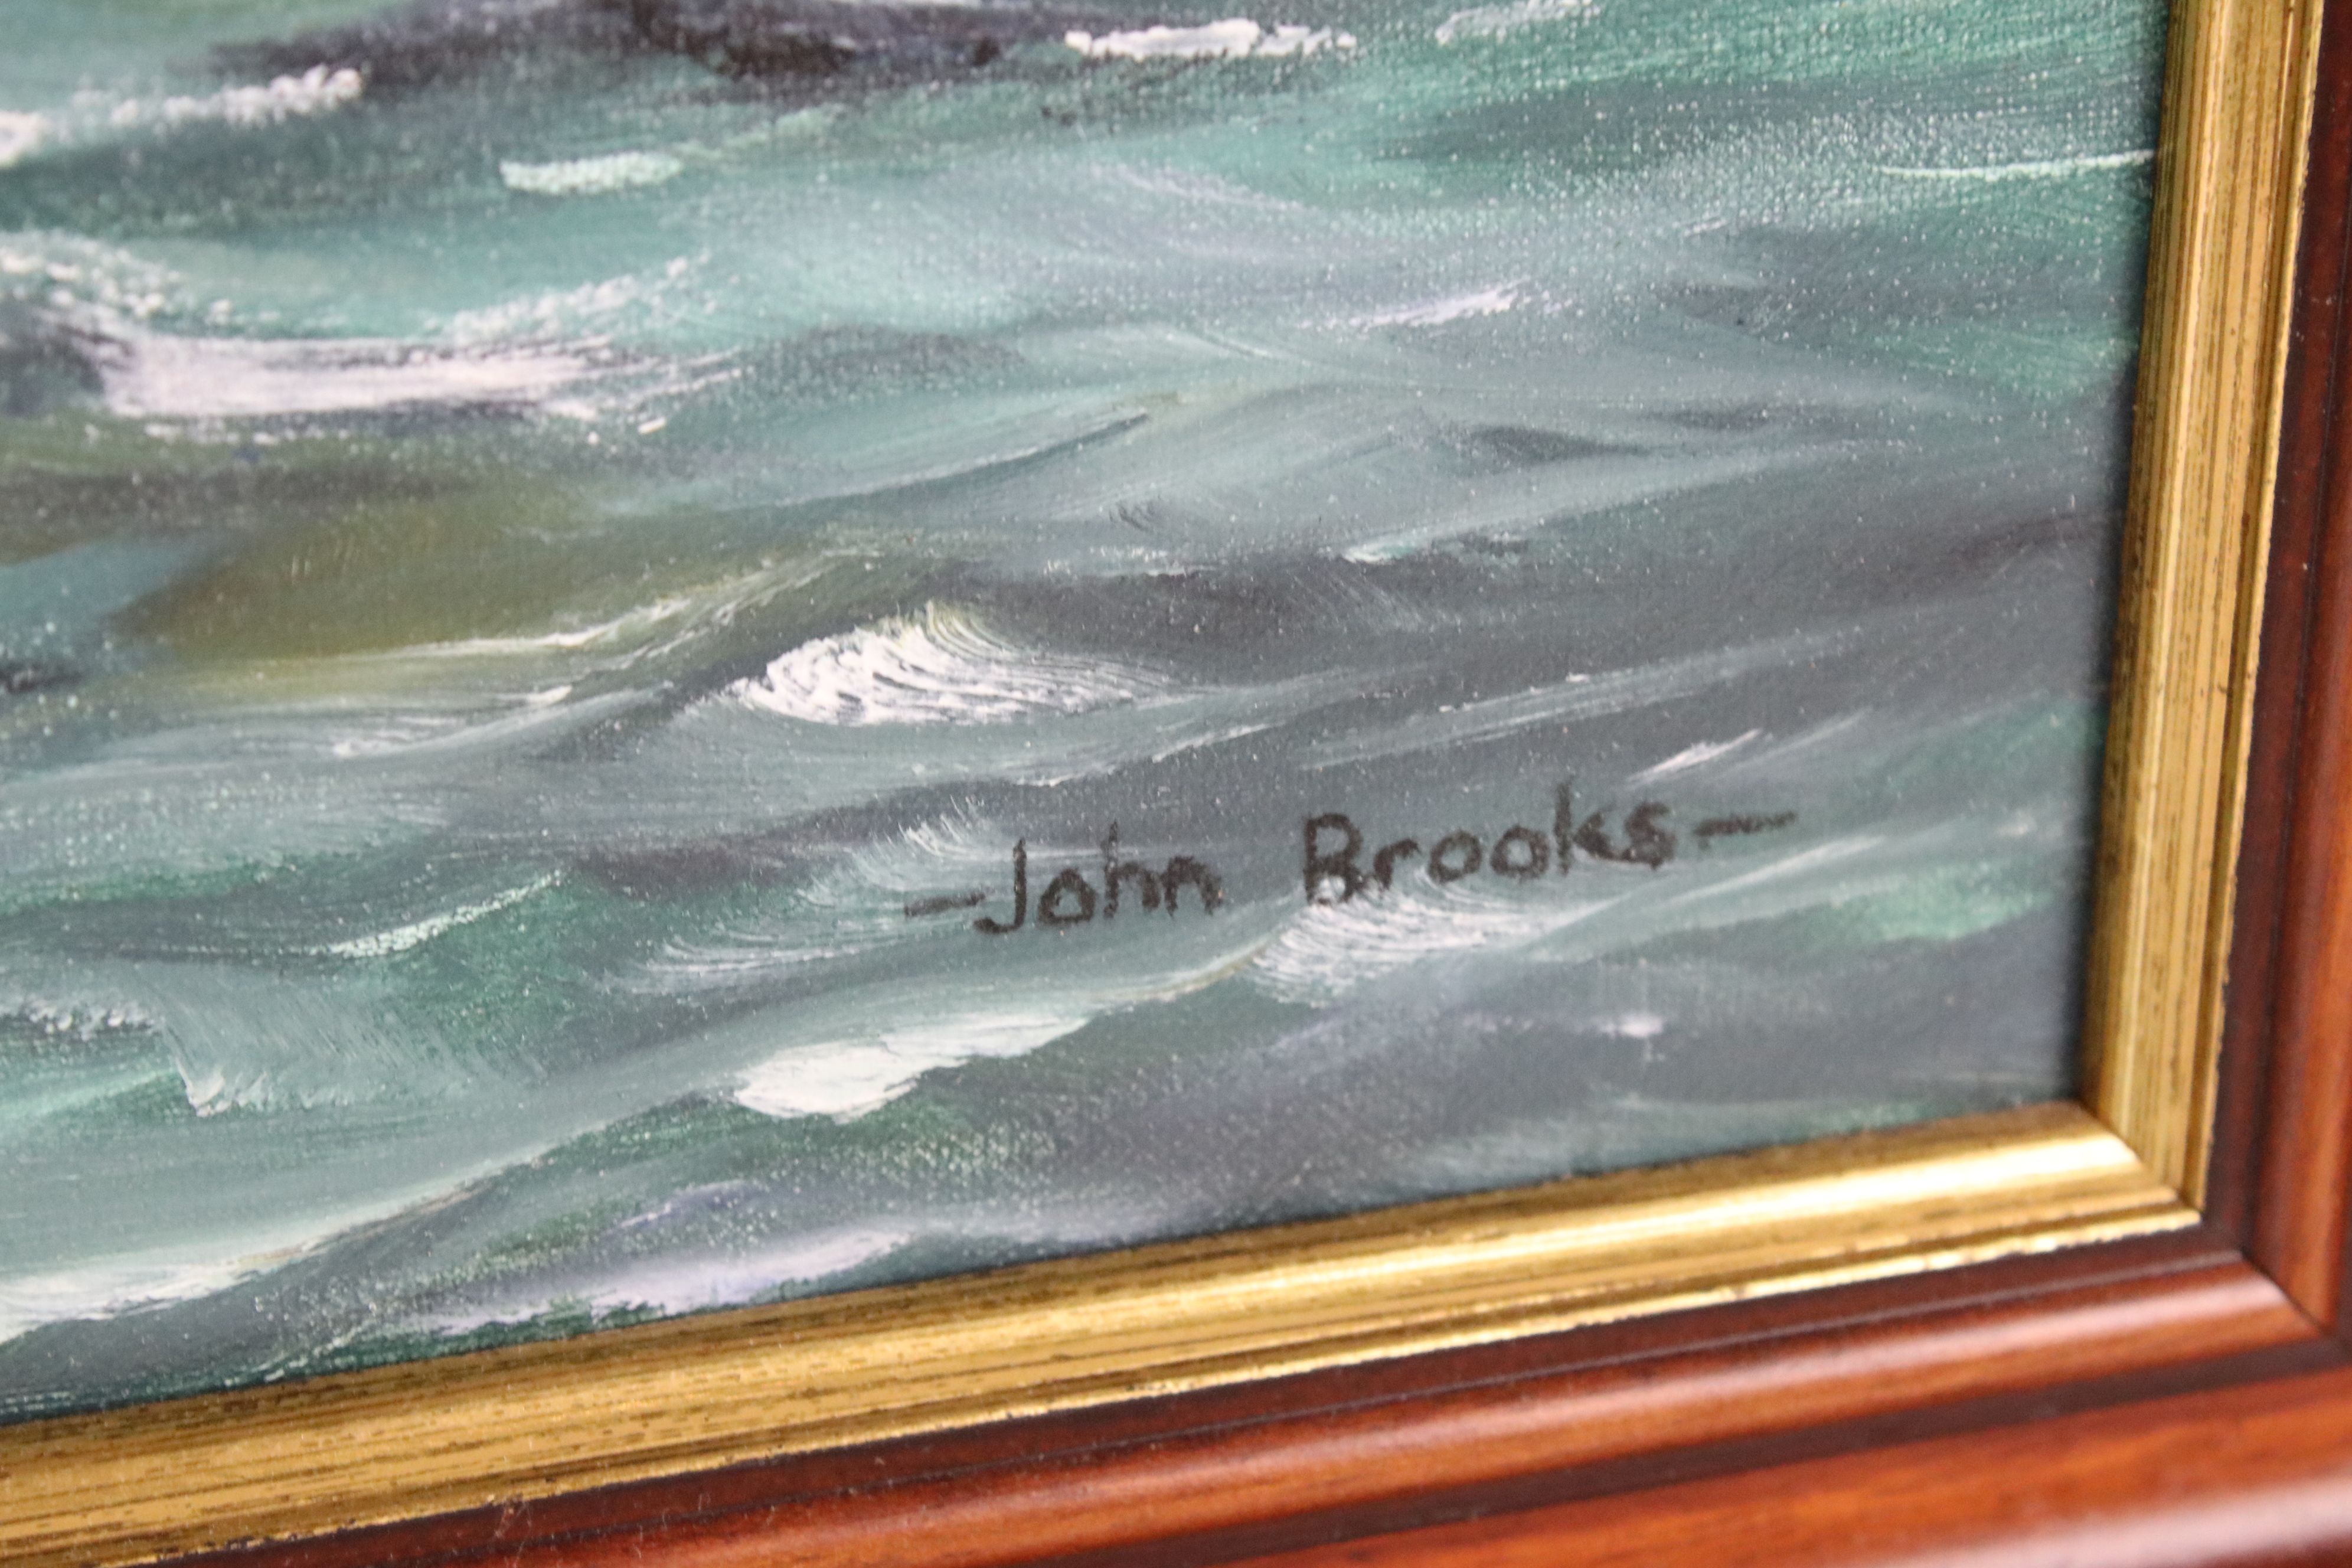 John Brooks (20th century) Oil Painting on Canvas of a Sunderland Flying Boat, signed lower right, - Image 12 of 12